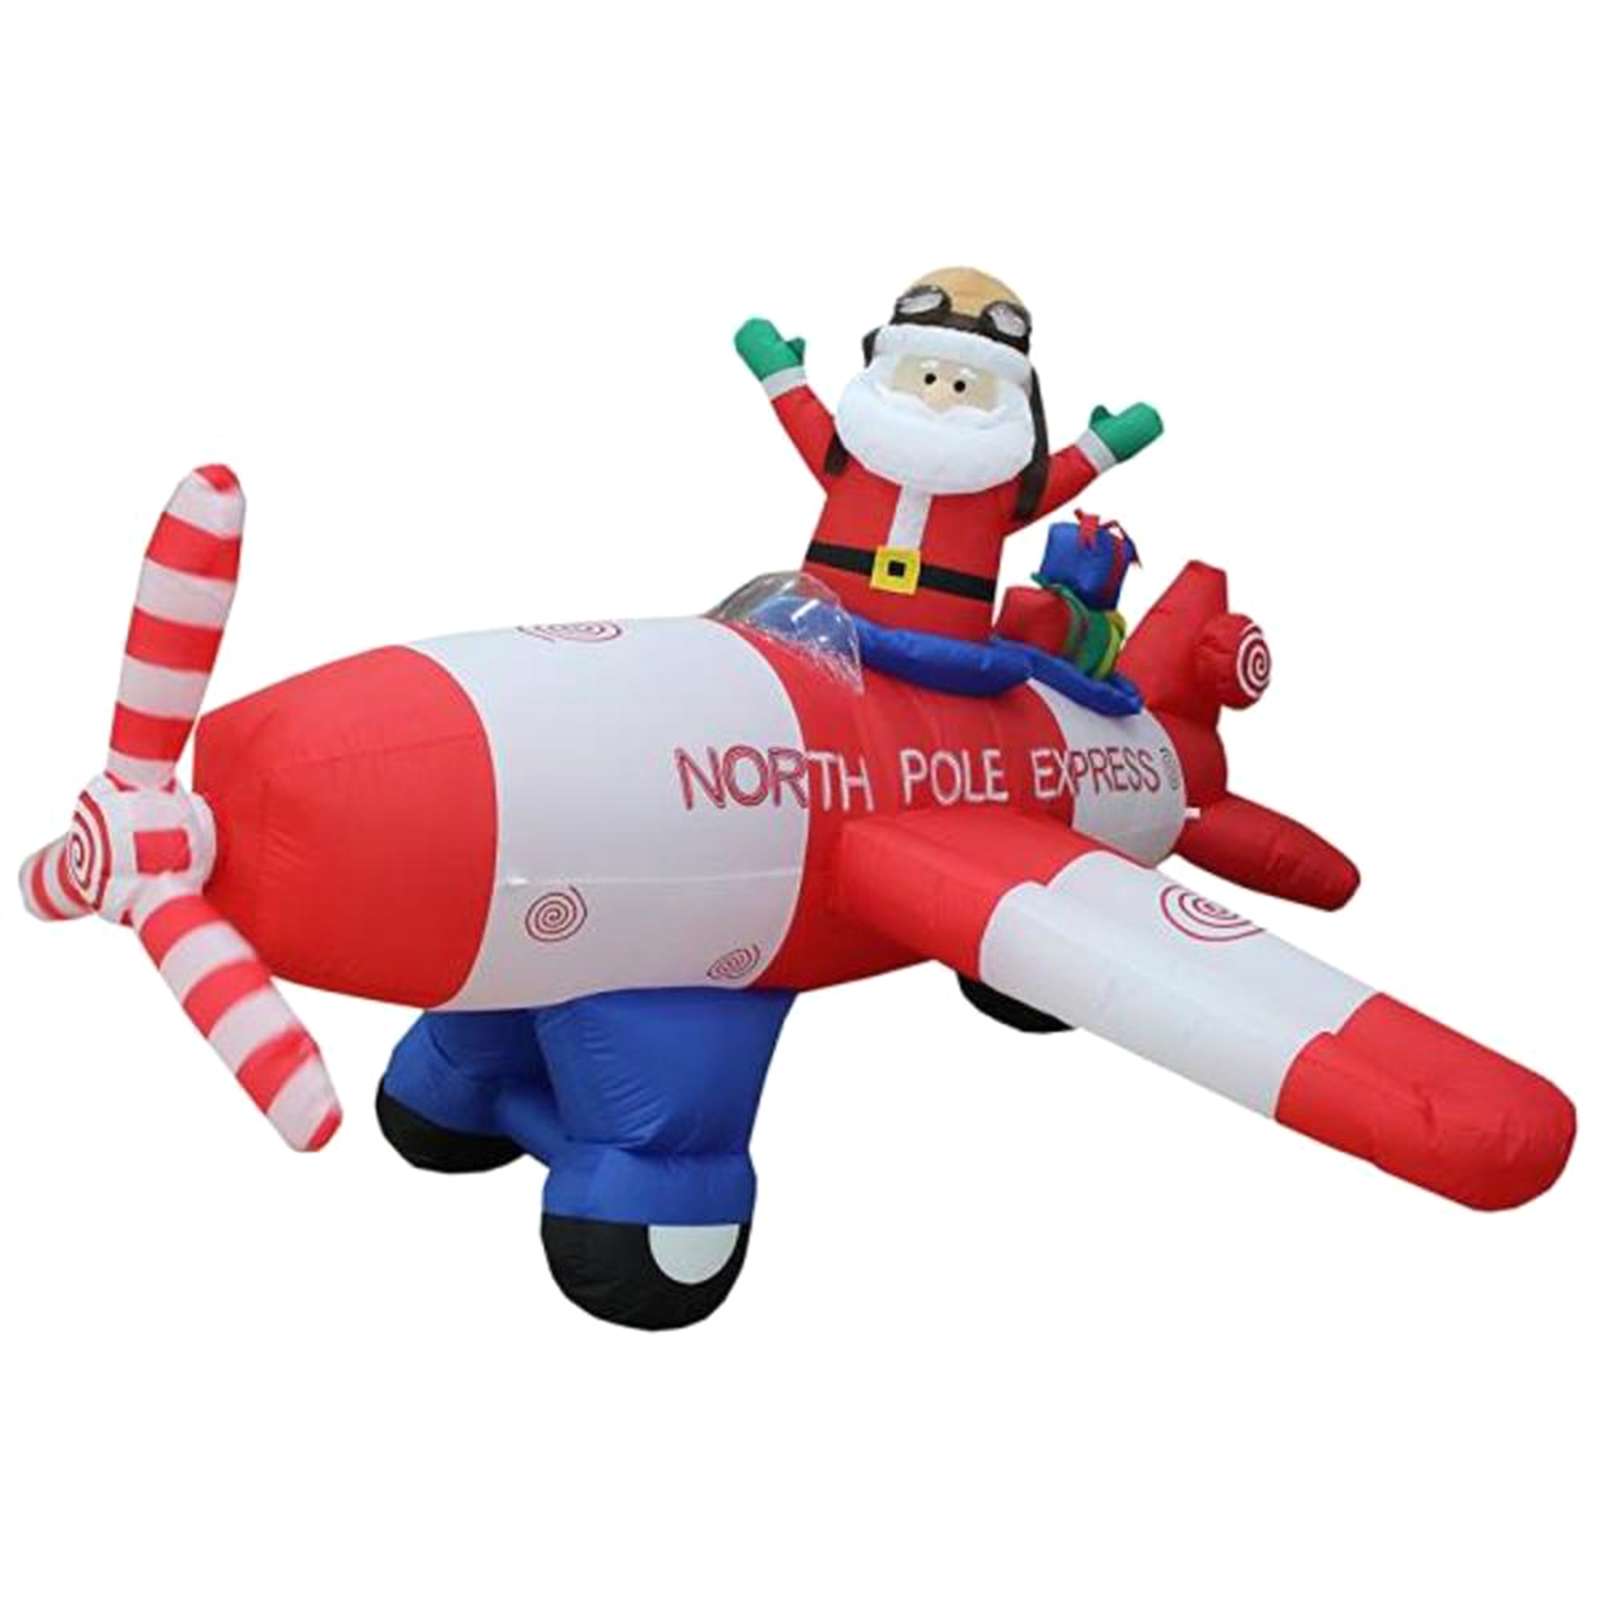 BZB Goods 8' Multicolored Polyester Inflatable Santa Claus Flying Airplane